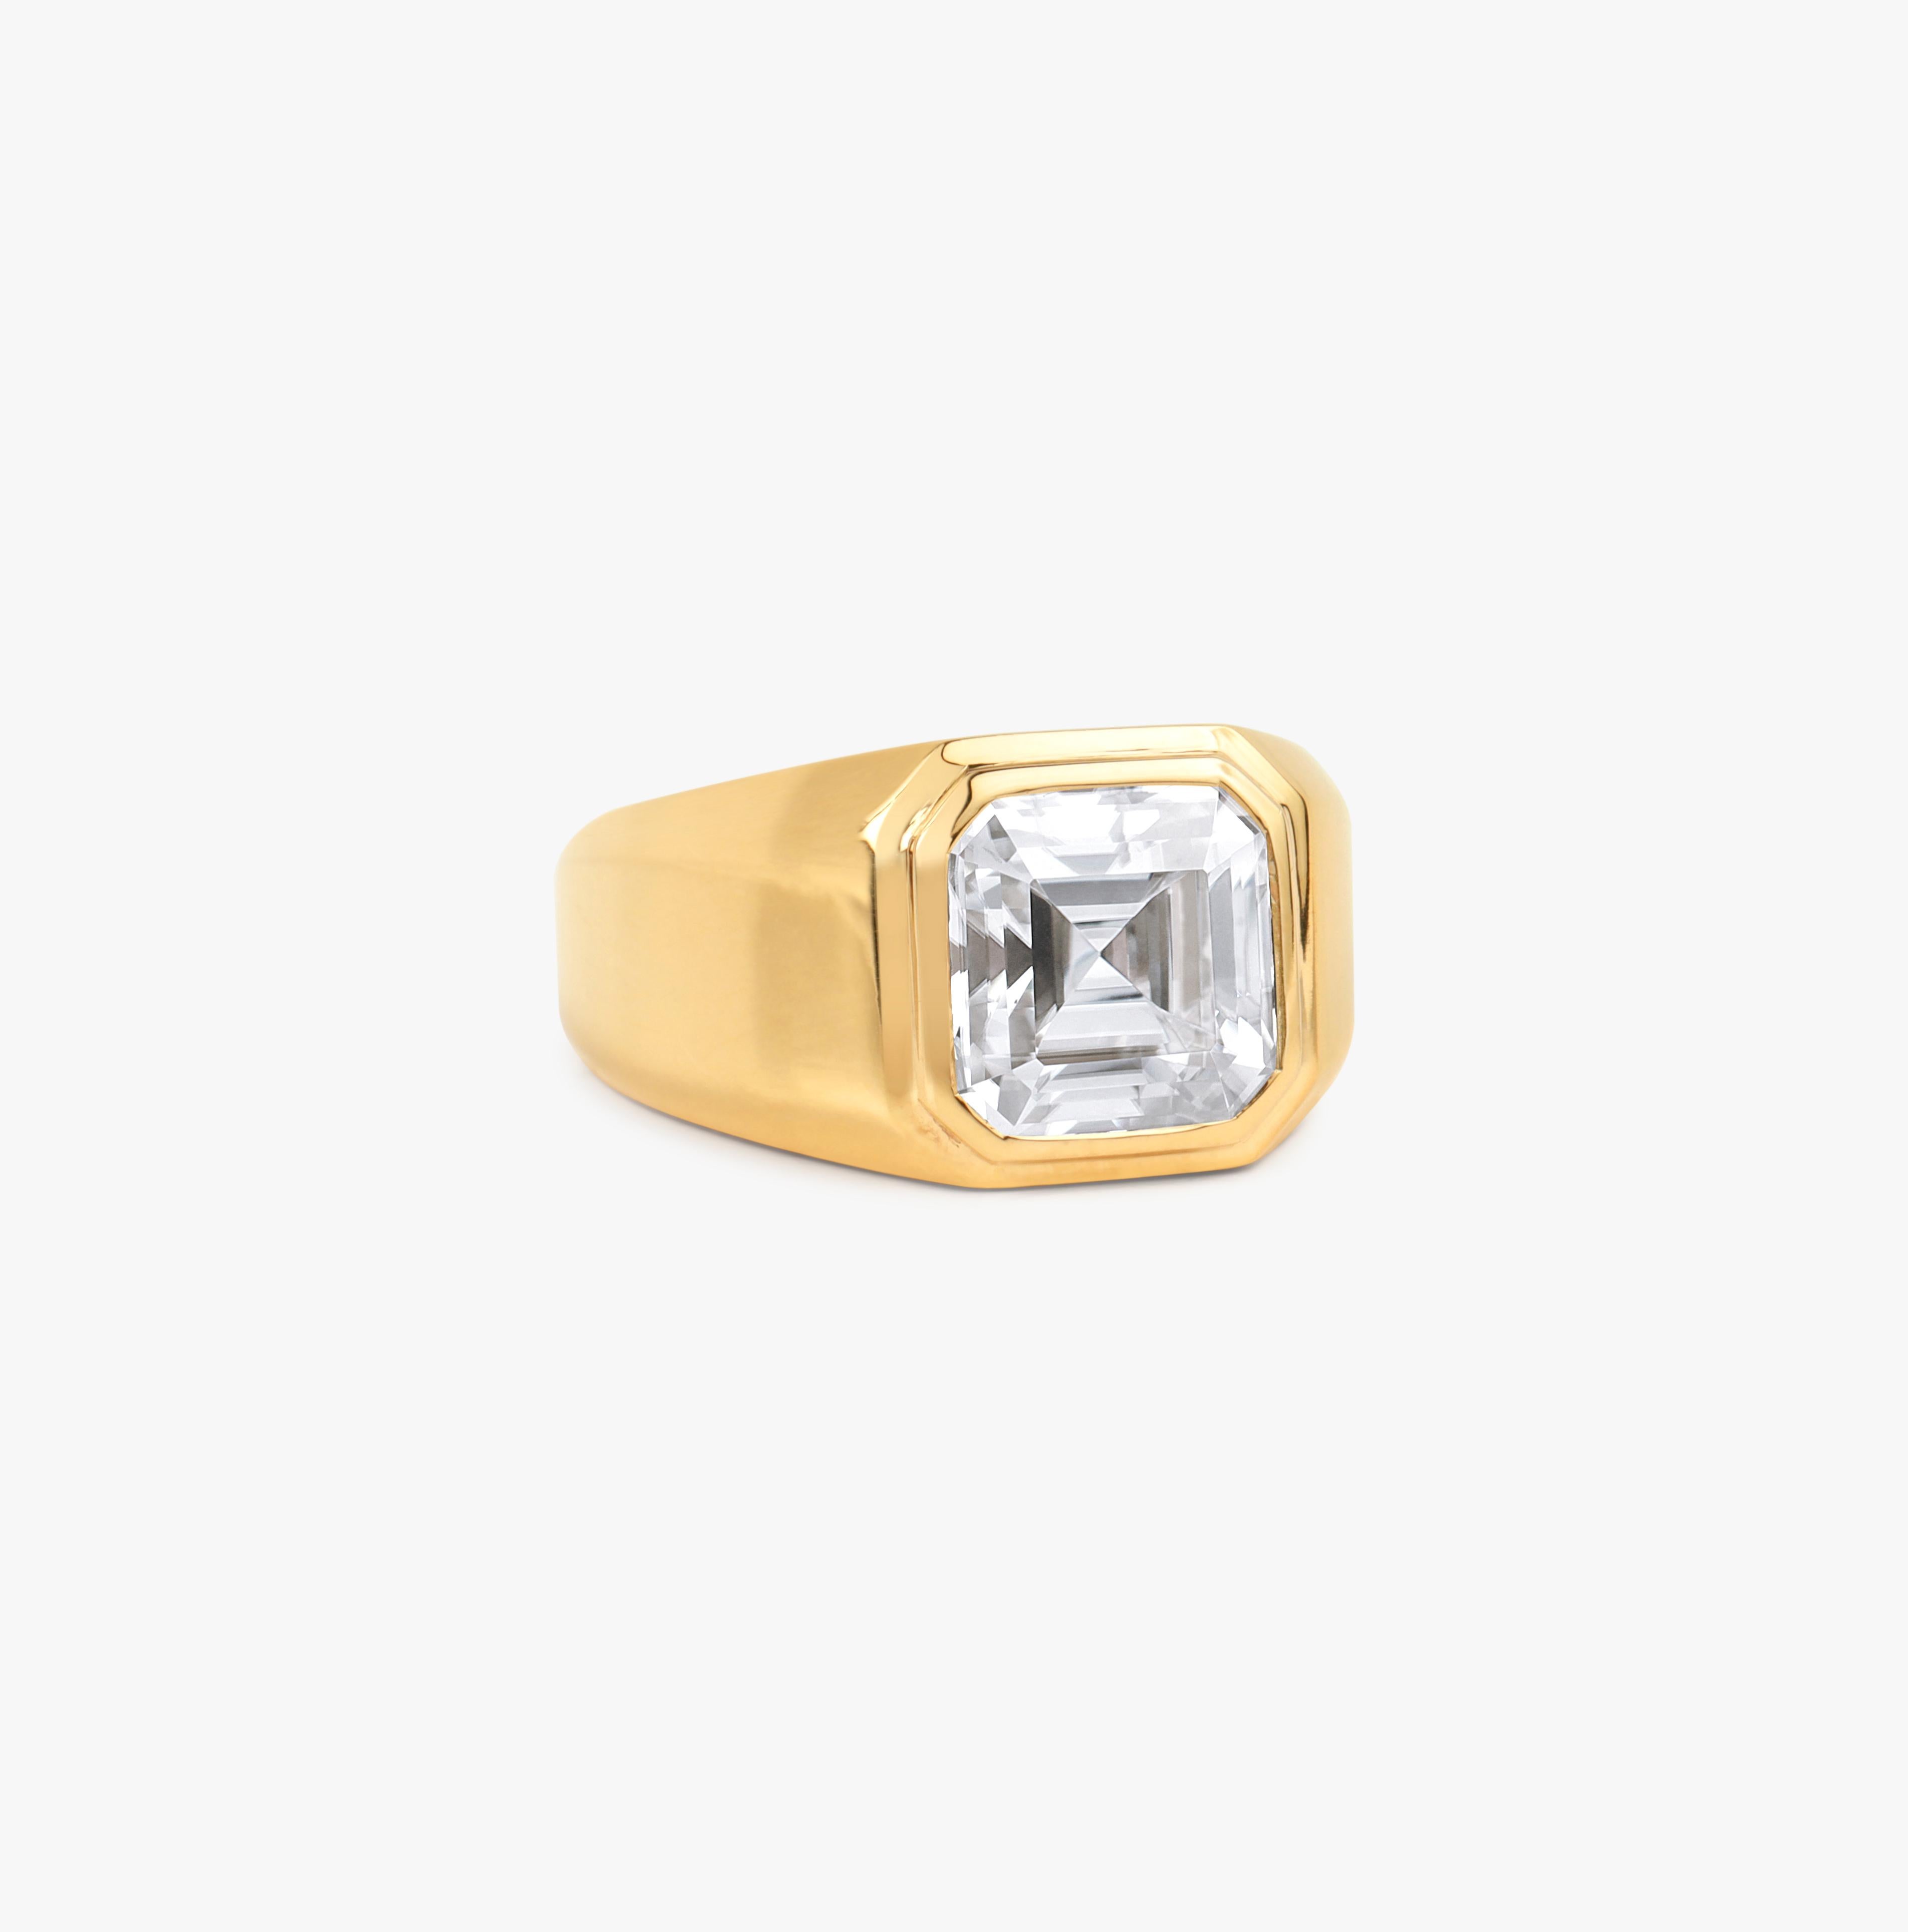 GIA Report Certified 3 Carat Asscher Cut Diamond in 18k Yellow Gold Signet Ring  In New Condition For Sale In Jaipur, RJ